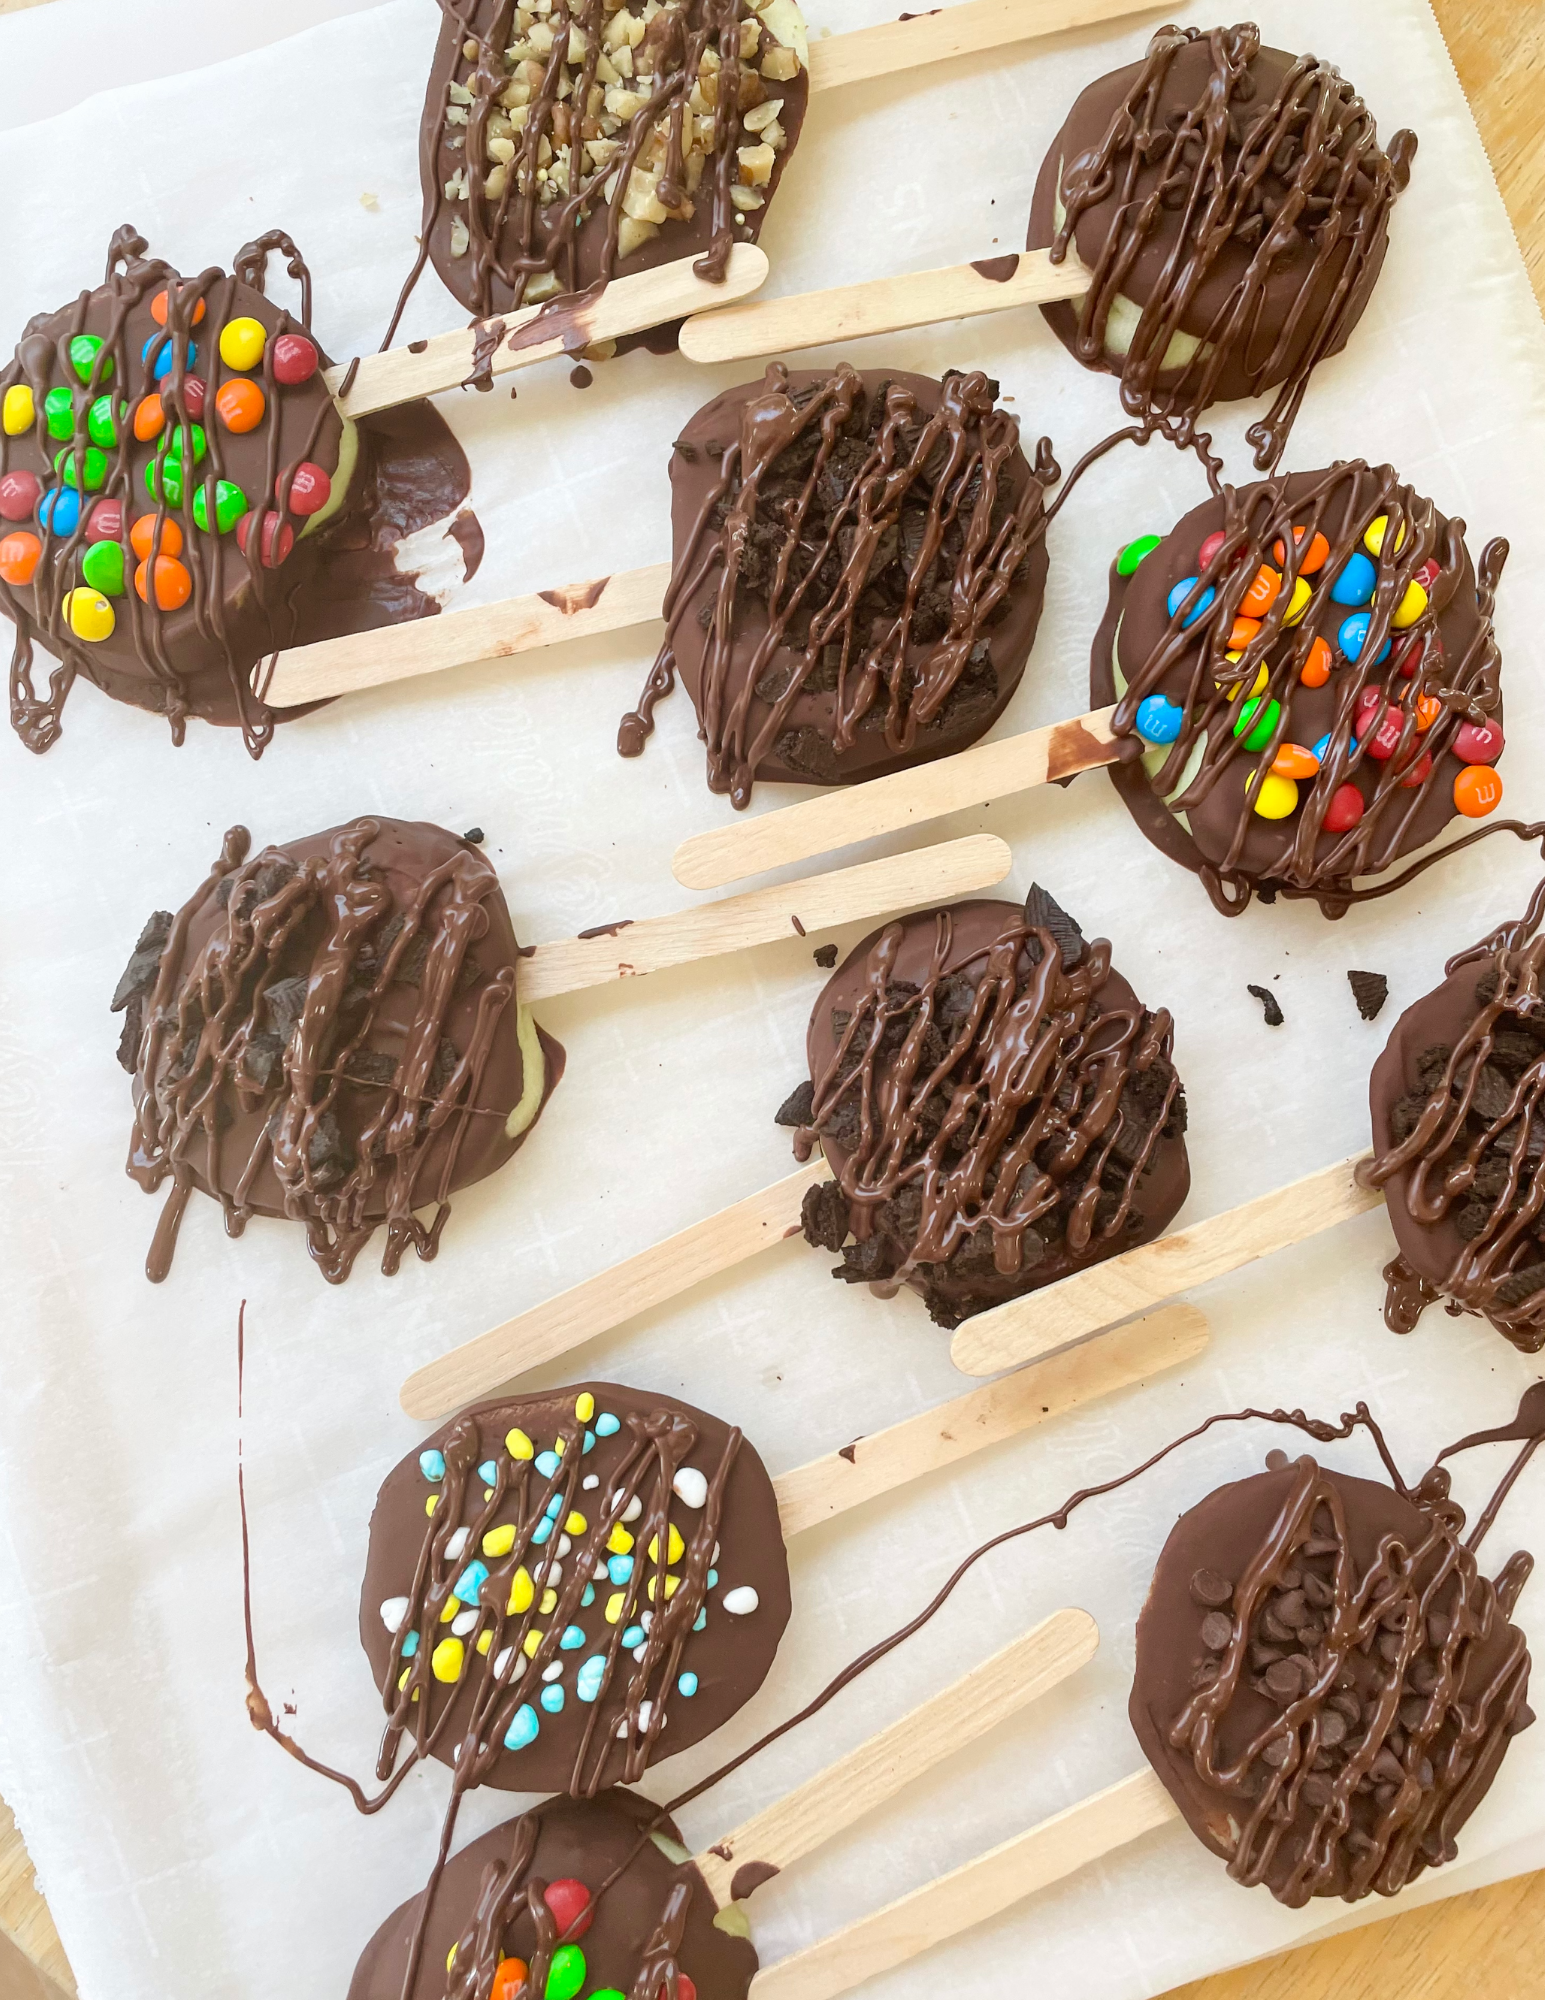 chocolate apple pops | apples | chocolate covered apples | kids snacks | snacks for kids | kids party snacks | birthday party snacks | chocolate covered apple pops | chocolate covered fruit | healthy snacks for kids | kid friendly snacks | summer snacks for kids | kids birthday snacks | kids dessert | healthy food | how to make chocolate covered apple pops | 